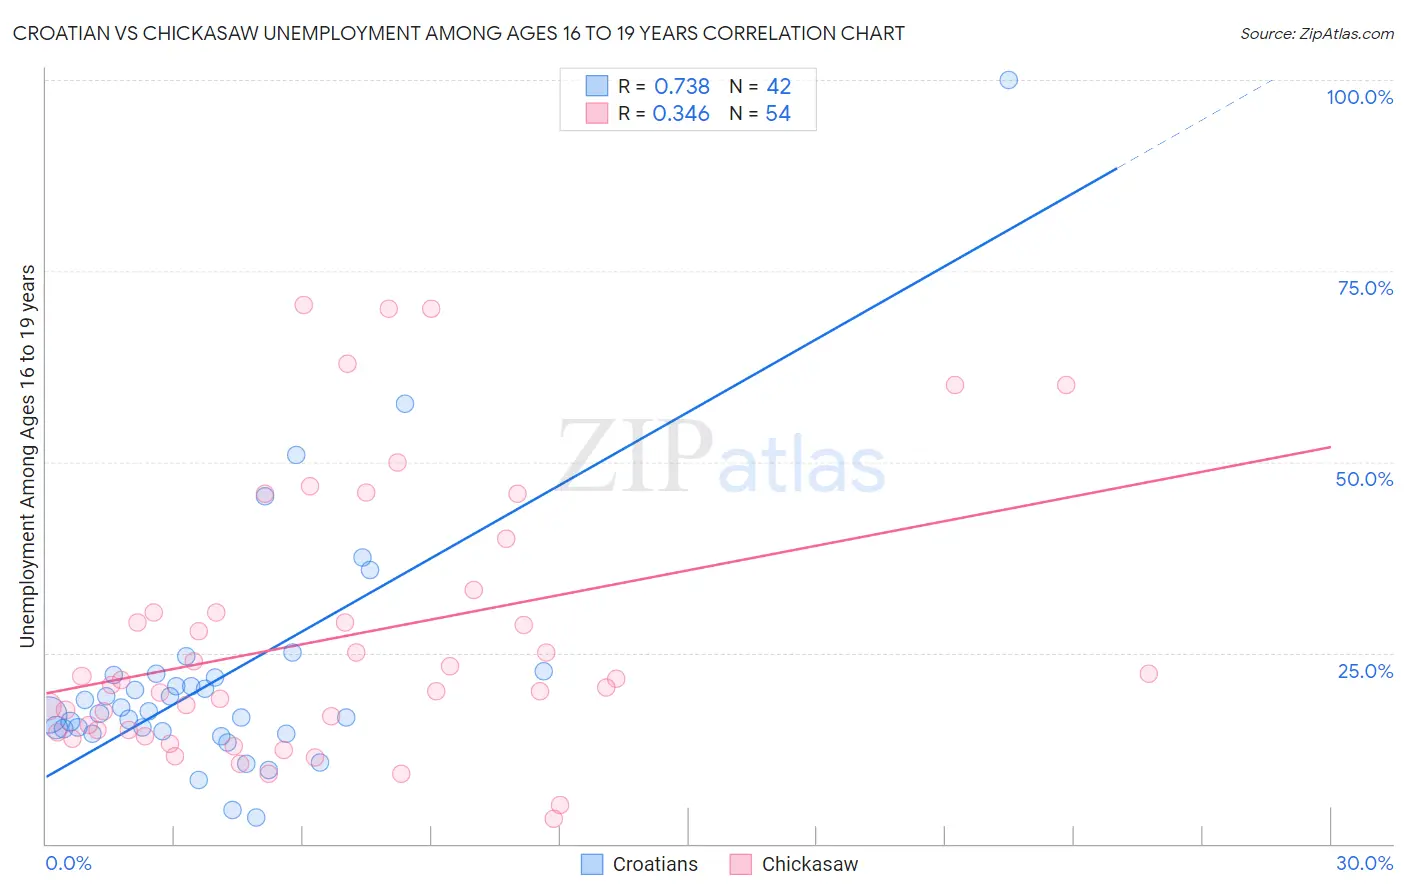 Croatian vs Chickasaw Unemployment Among Ages 16 to 19 years